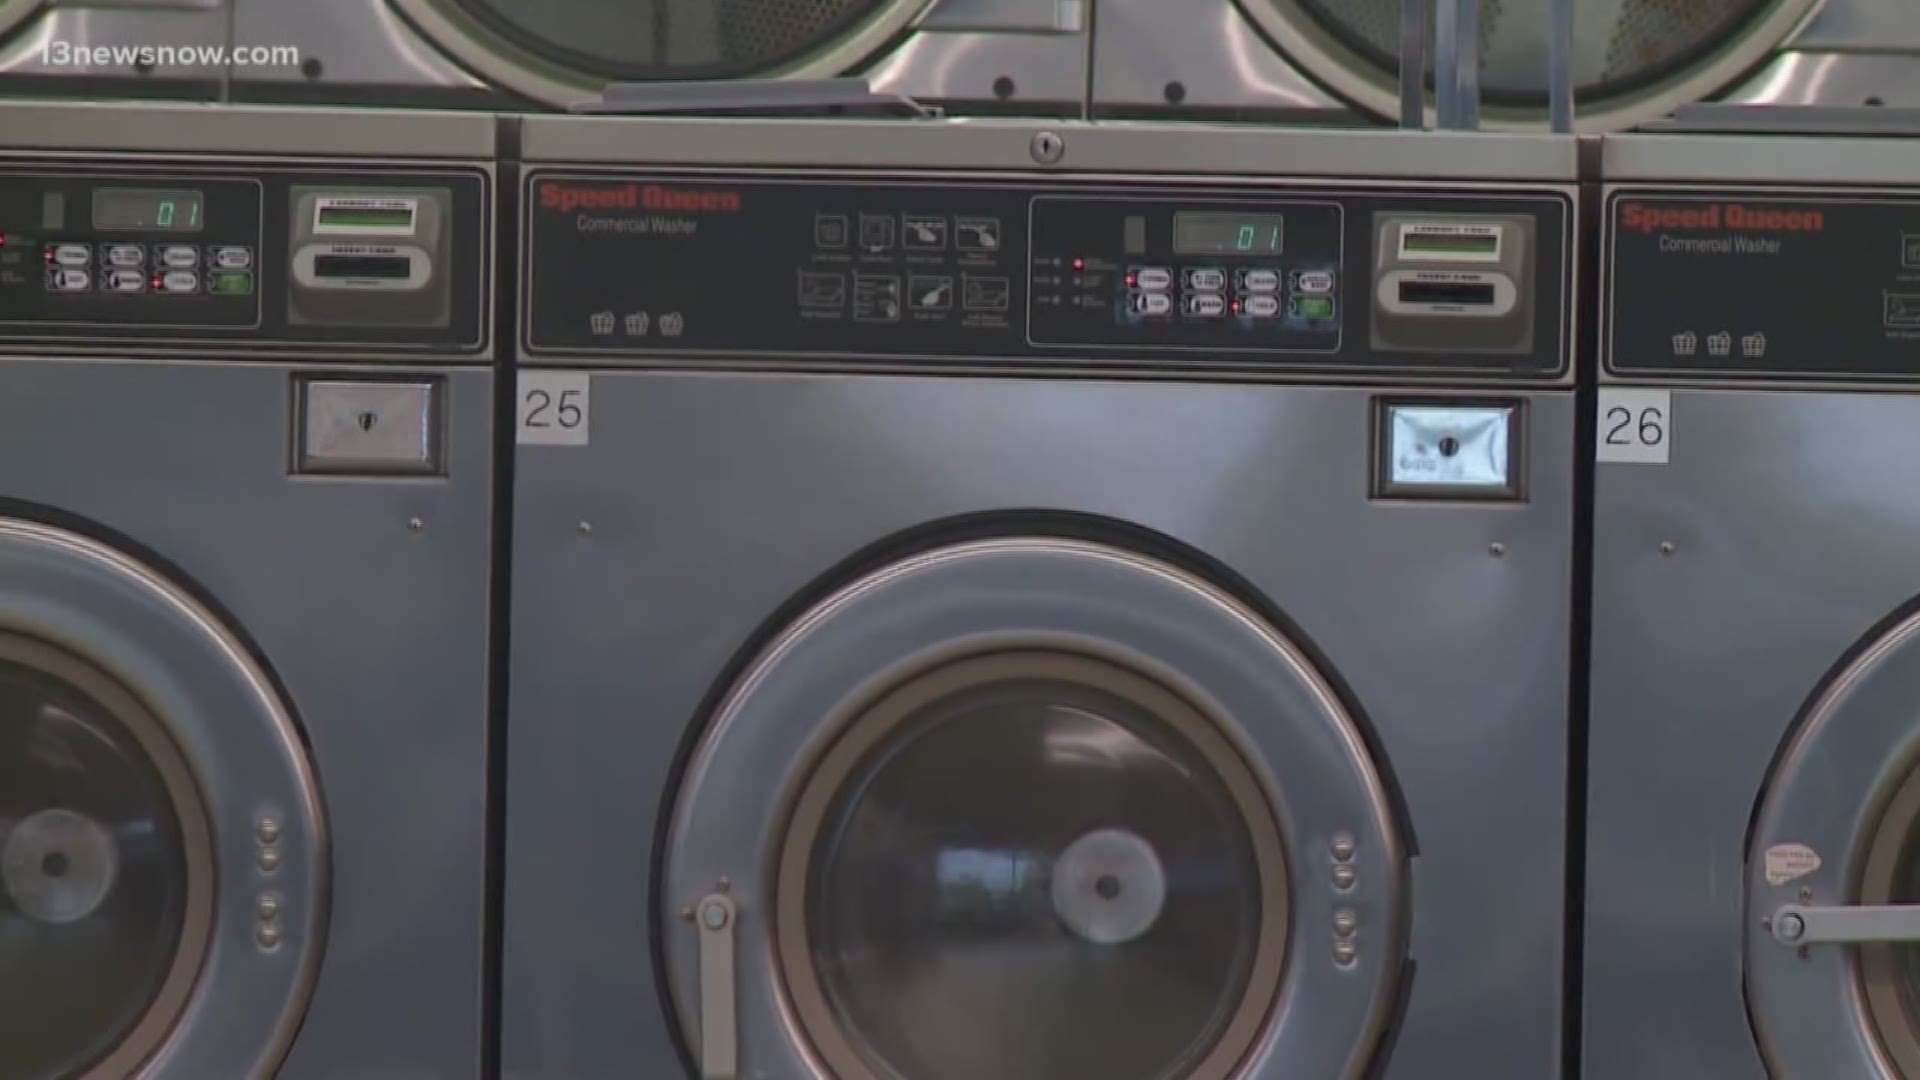 Essential businesses like laundromats and dry cleaners are staying open through the coronavirus pandemic, but they're making adjustments to keep people safe.